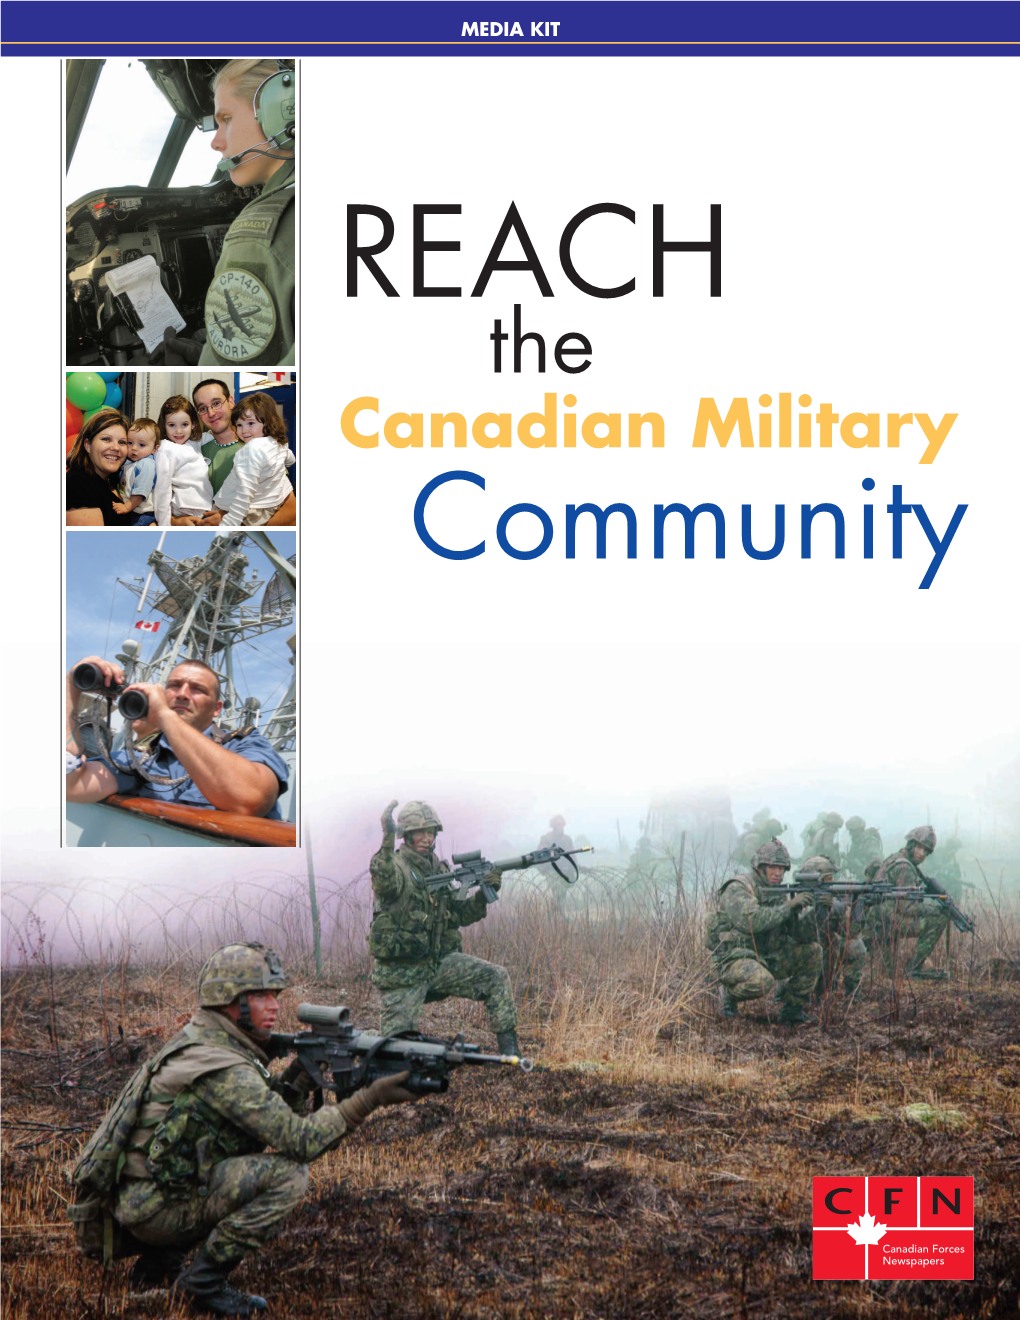 Canadian Military Community DEMOGRAPHICS ADVERTISE in 16 CANADIAN FORCES NEWSPAPERS LOCATED ACROSS CANADA Representing the Three CF Elements: Army, Air Force & Navy